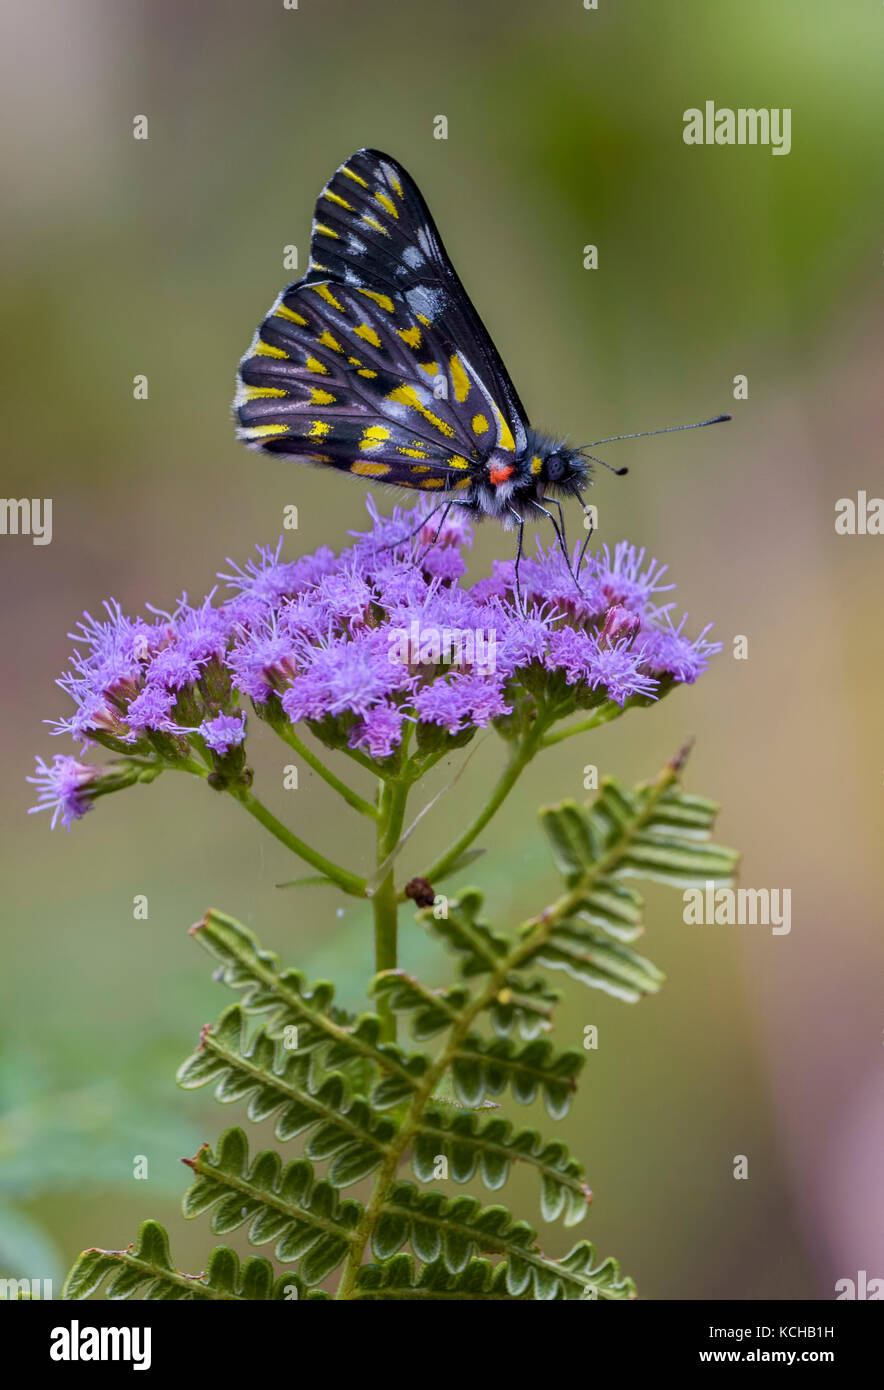 Dartwhite, Butterfly perched on a flower, Costa Rica Stock Photo